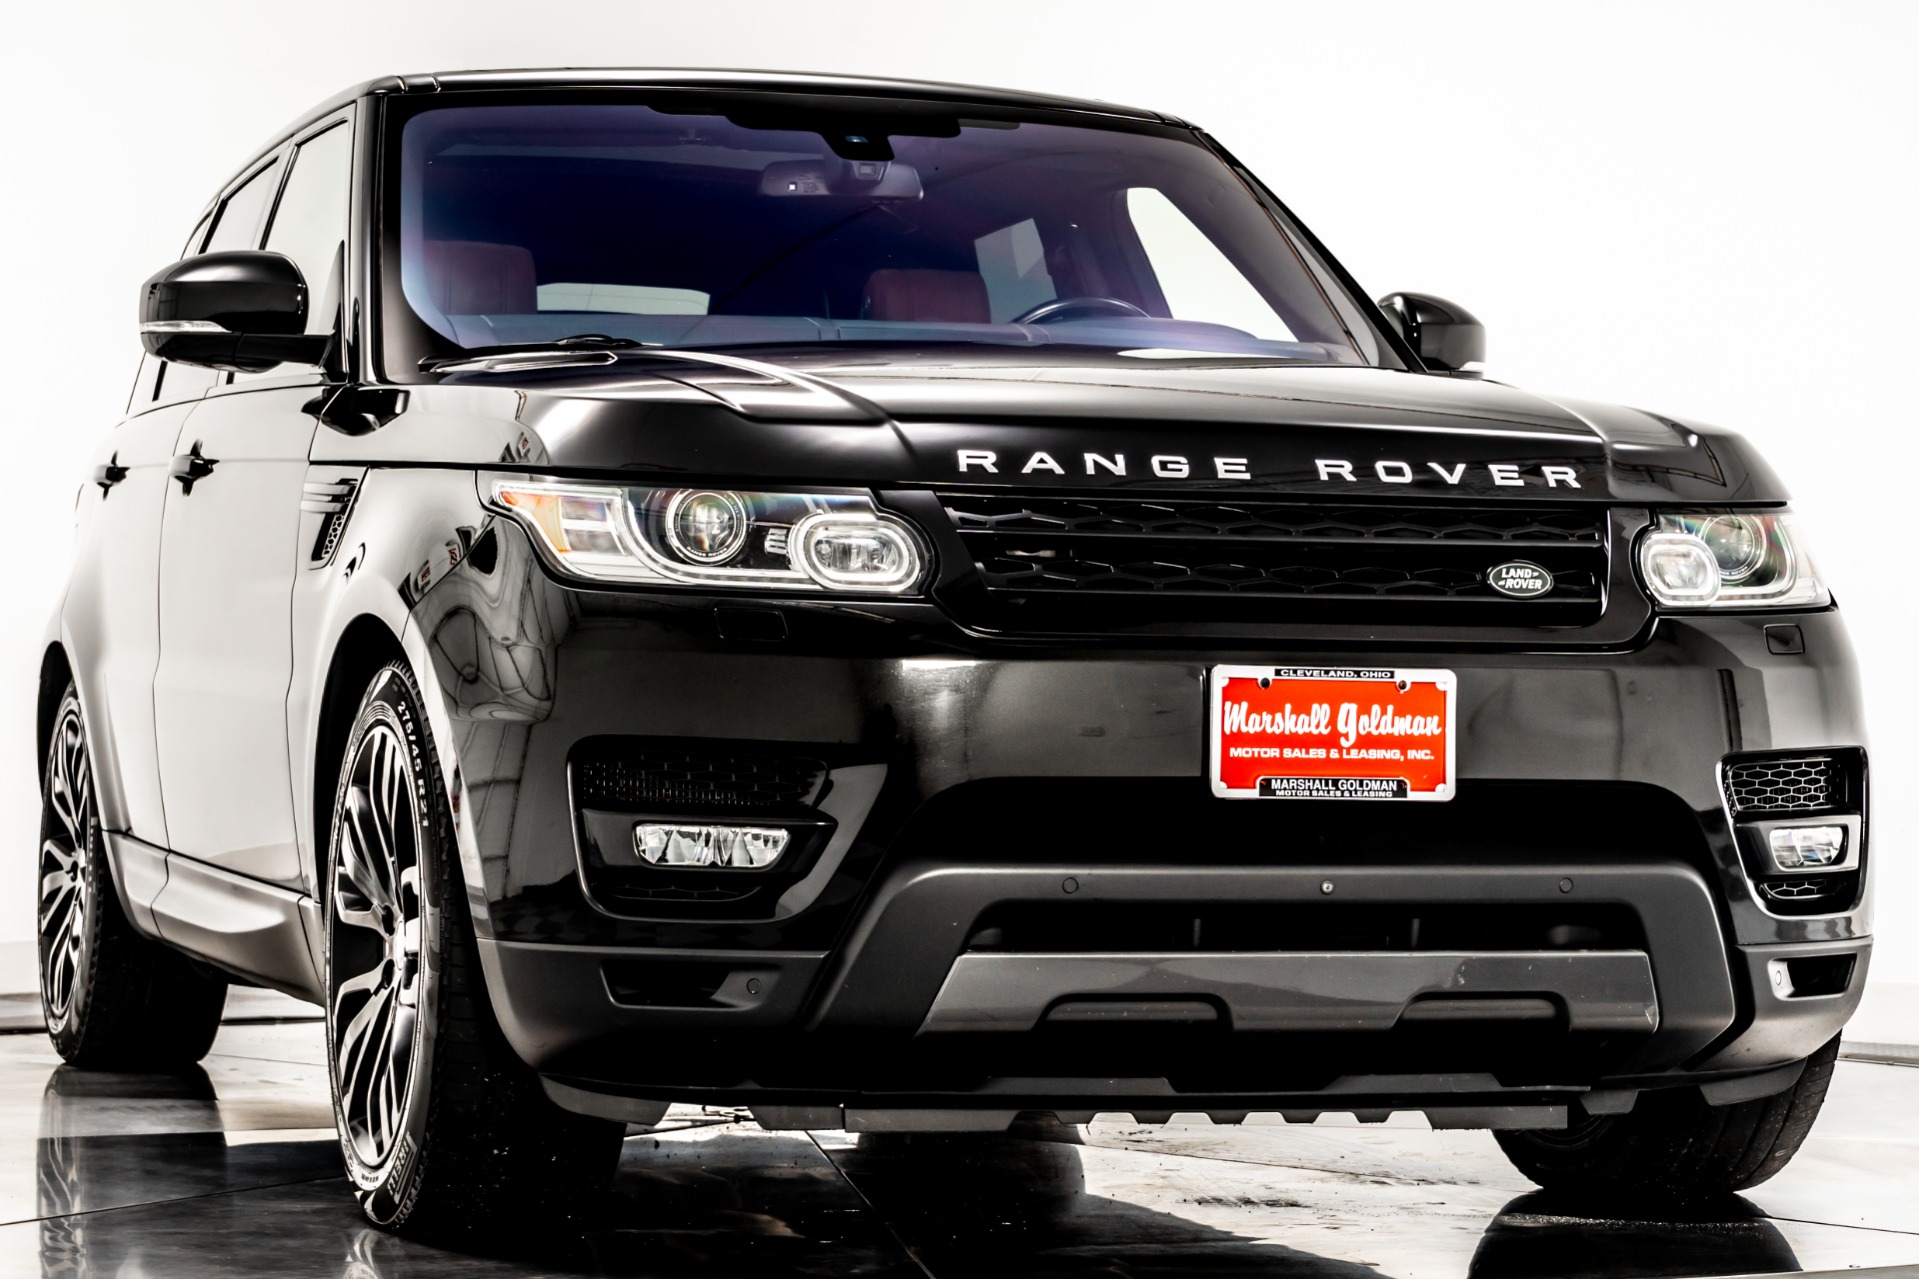 2016 Range Rover Sport in custom color Scotia Gray. What a